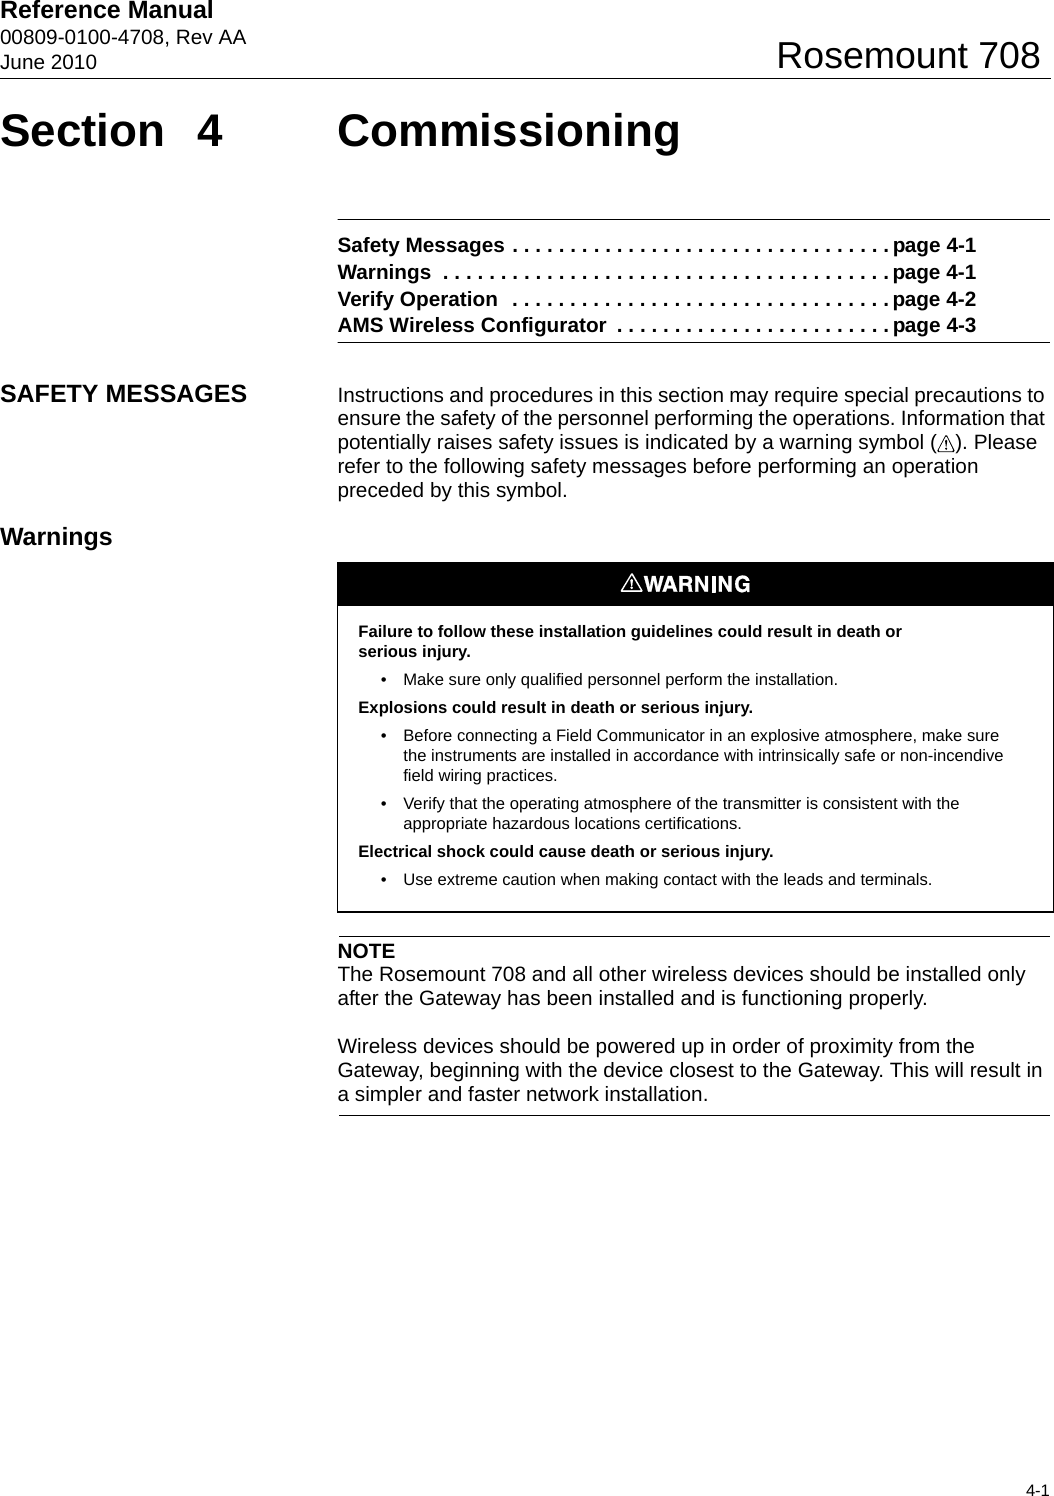 Reference Manual 00809-0100-4708, Rev AAJune 20104-1Rosemount 708Section 4 CommissioningSafety Messages . . . . . . . . . . . . . . . . . . . . . . . . . . . . . . . . . page 4-1Warnings  . . . . . . . . . . . . . . . . . . . . . . . . . . . . . . . . . . . . . . . page 4-1Verify Operation  . . . . . . . . . . . . . . . . . . . . . . . . . . . . . . . . . page 4-2AMS Wireless Configurator  . . . . . . . . . . . . . . . . . . . . . . . . page 4-3SAFETY MESSAGES Instructions and procedures in this section may require special precautions to ensure the safety of the personnel performing the operations. Information that potentially raises safety issues is indicated by a warning symbol ( ). Please refer to the following safety messages before performing an operation preceded by this symbol.WarningsNOTEThe Rosemount 708 and all other wireless devices should be installed only after the Gateway has been installed and is functioning properly.Wireless devices should be powered up in order of proximity from the Gateway, beginning with the device closest to the Gateway. This will result in a simpler and faster network installation.Failure to follow these installation guidelines could result in death orserious injury. • Make sure only qualified personnel perform the installation.Explosions could result in death or serious injury. • Before connecting a Field Communicator in an explosive atmosphere, make sure the instruments are installed in accordance with intrinsically safe or non-incendive field wiring practices.• Verify that the operating atmosphere of the transmitter is consistent with the appropriate hazardous locations certifications.Electrical shock could cause death or serious injury. • Use extreme caution when making contact with the leads and terminals.